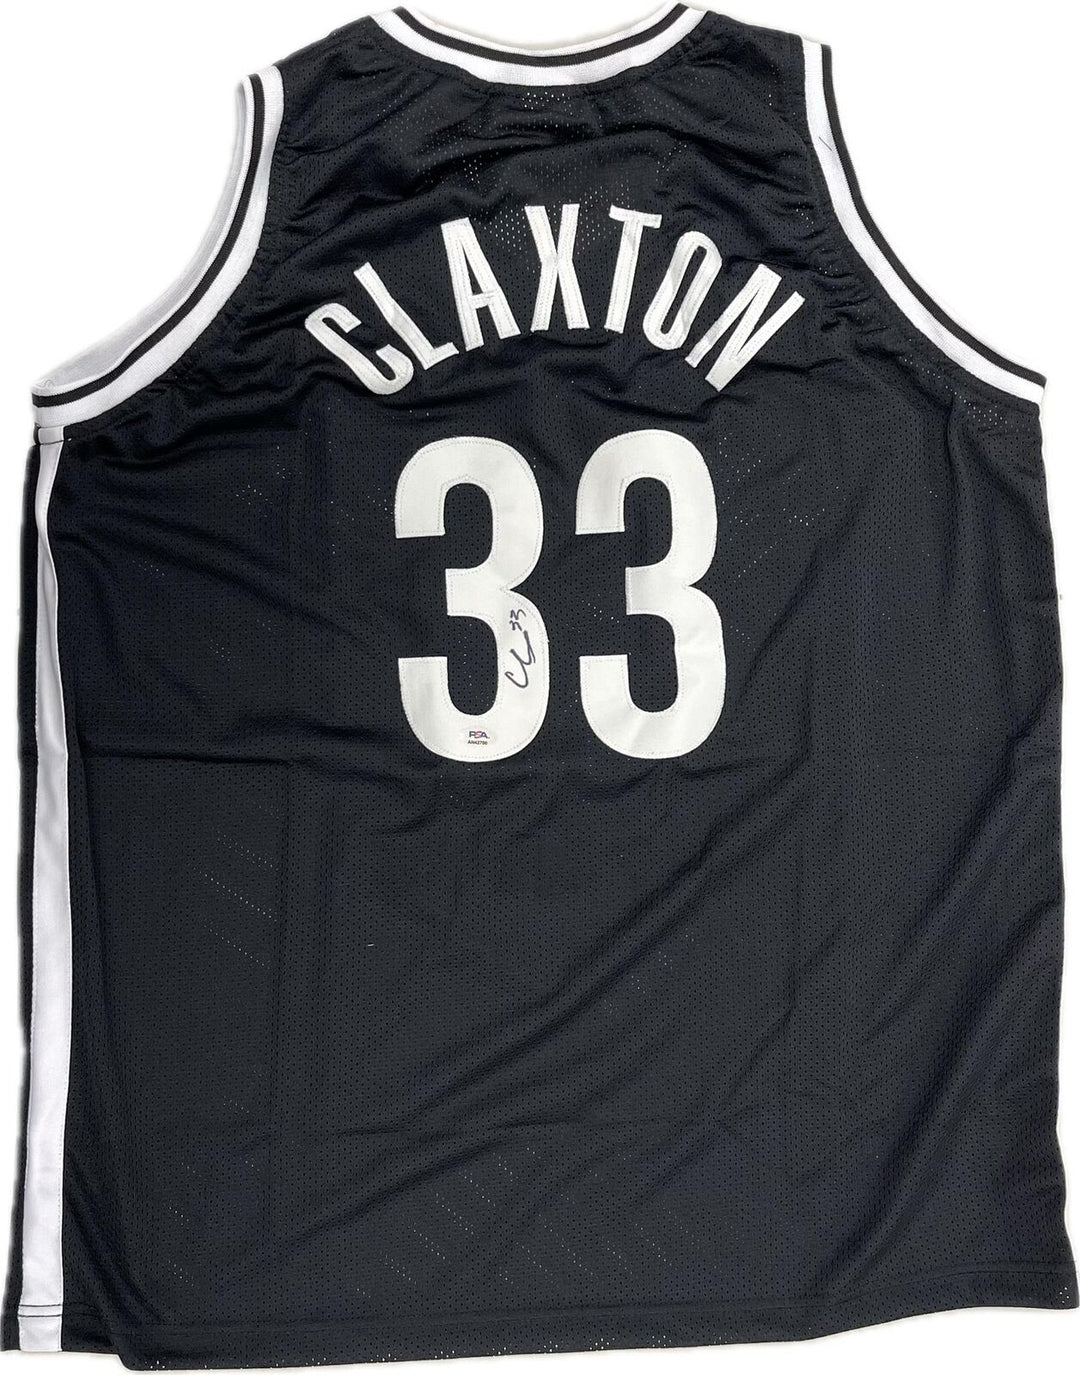 Nic Claxton Signed Jersey PSA/DNA Brooklyn Nets Autographed Image 1